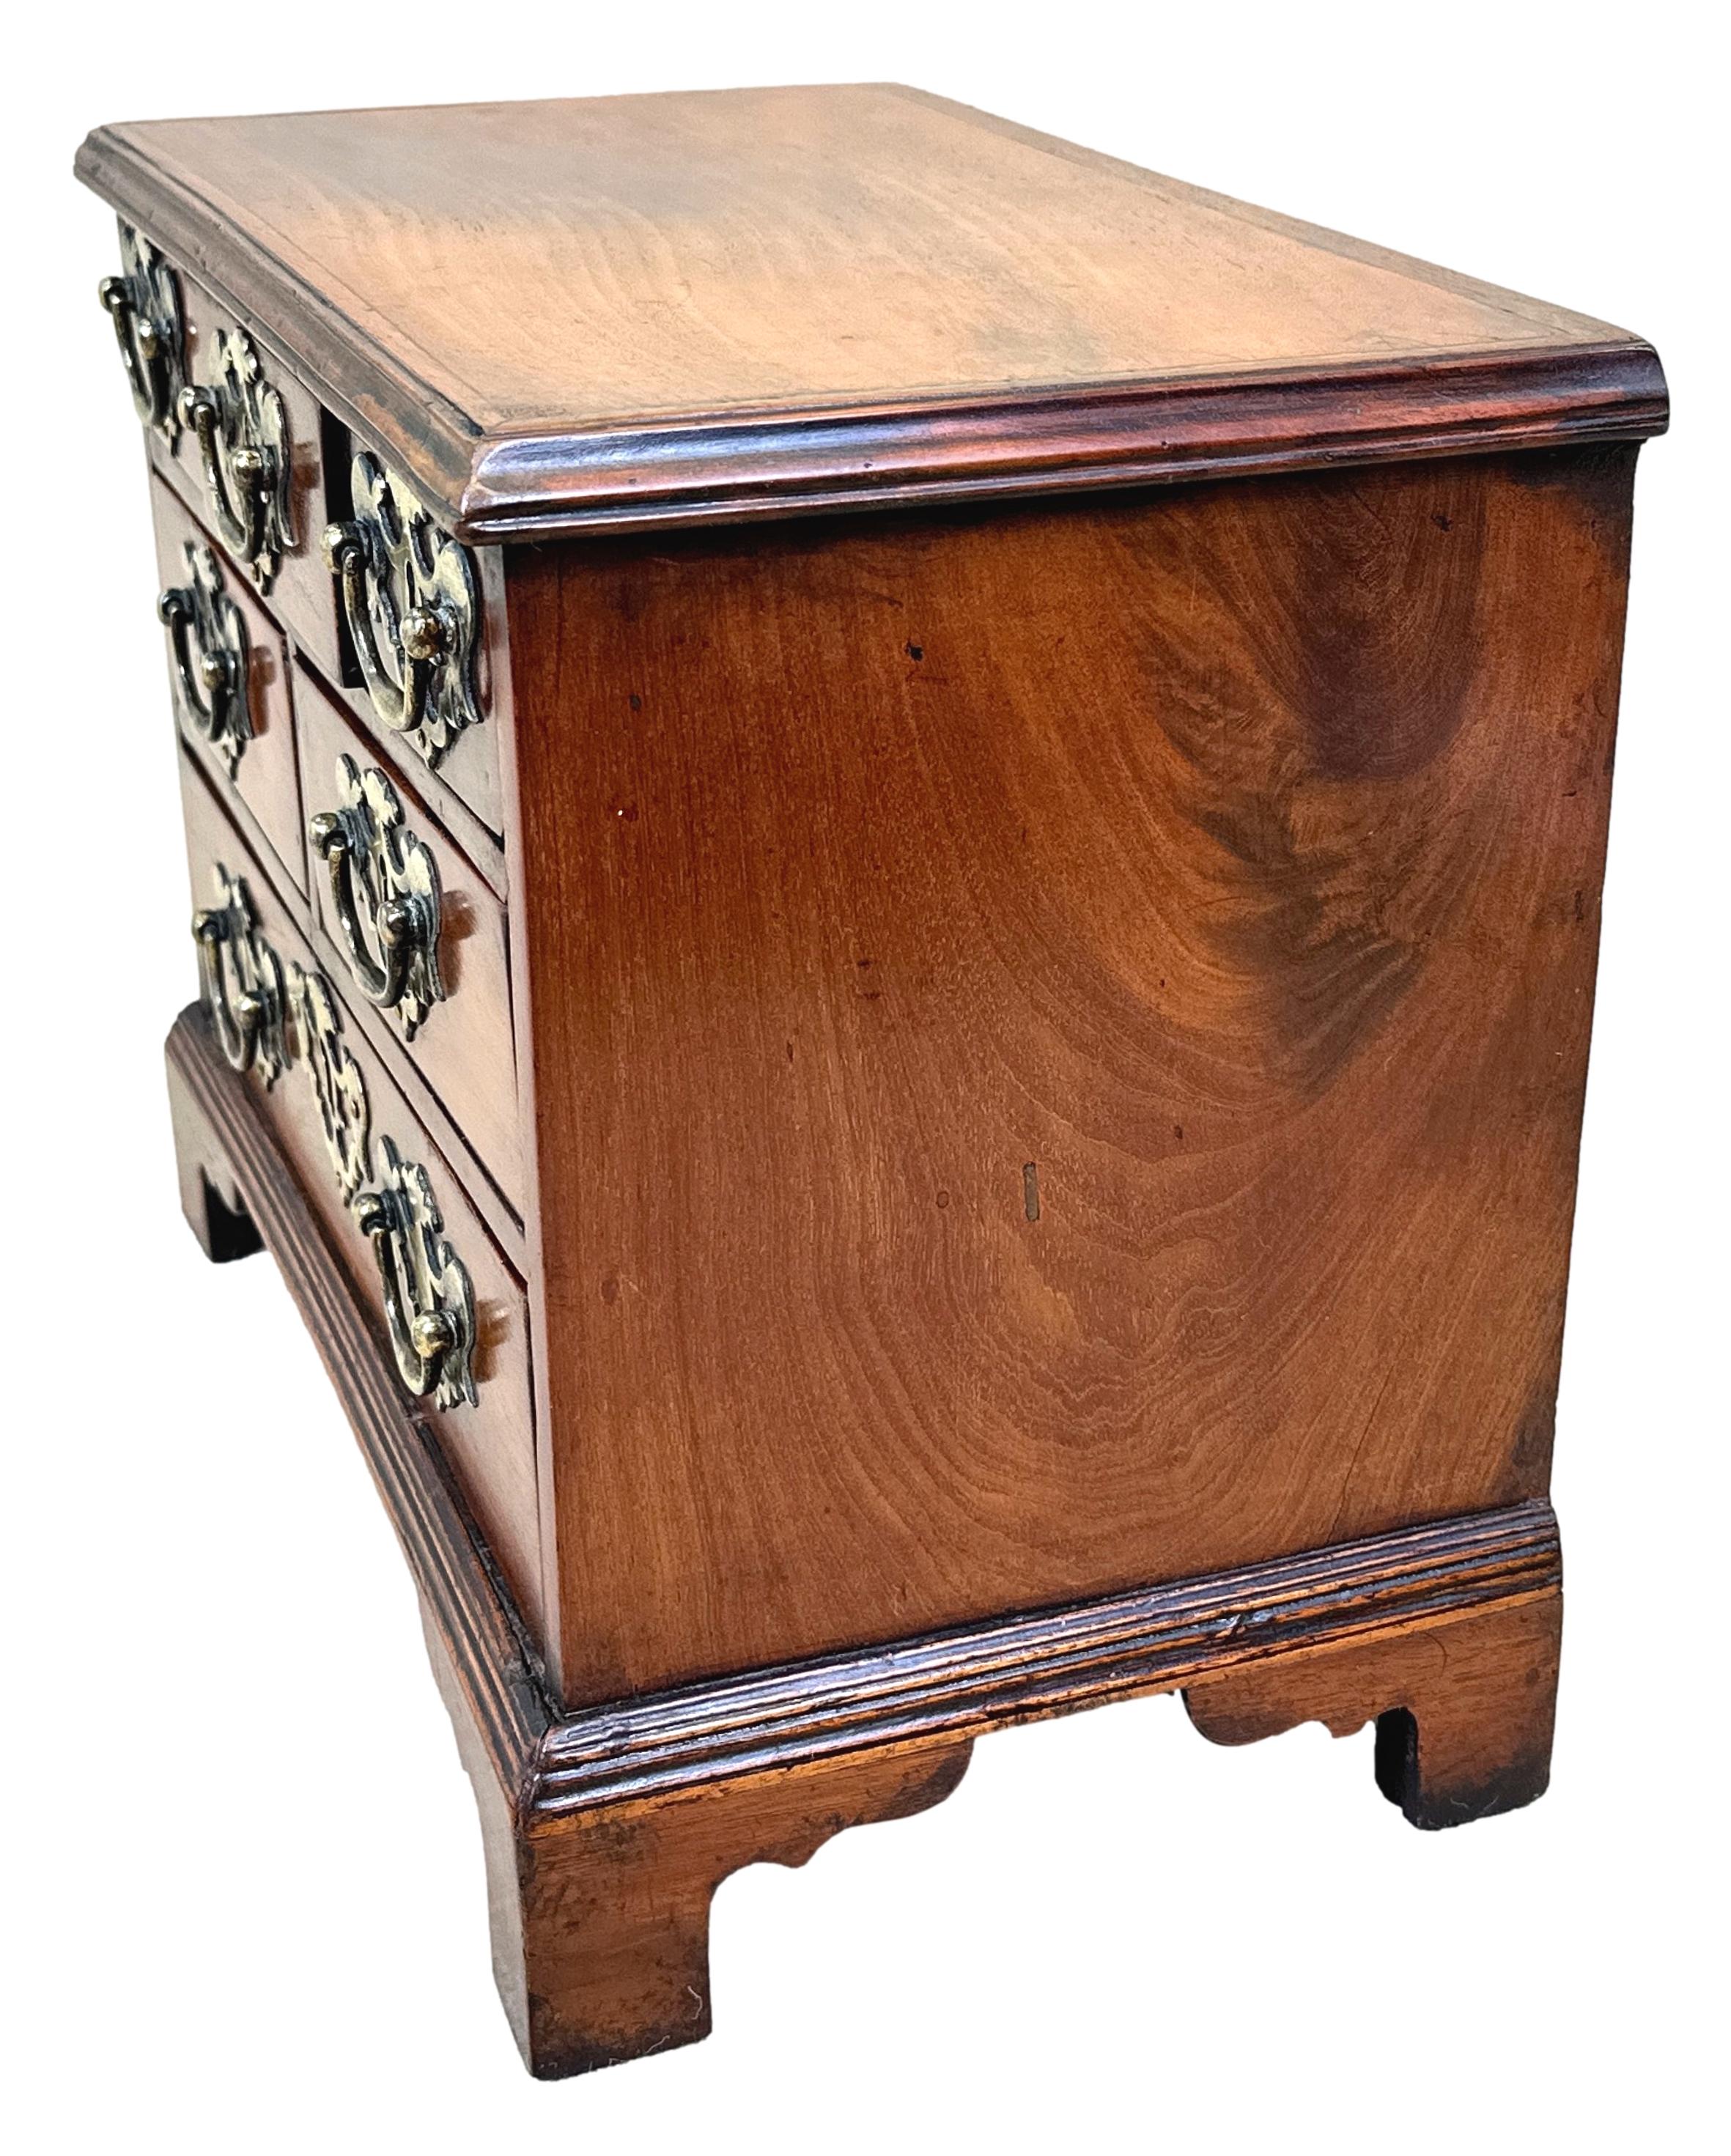 A Delightful And Charming 18th Century Mahogany, George II Period, Miniature Chest Having Superbly Figured Top, Over Unusual Arrangement Of Drawers, Retaining Incredible Original Brass Open Plate Handles, Raised On Original Bracket Feet, Retaining